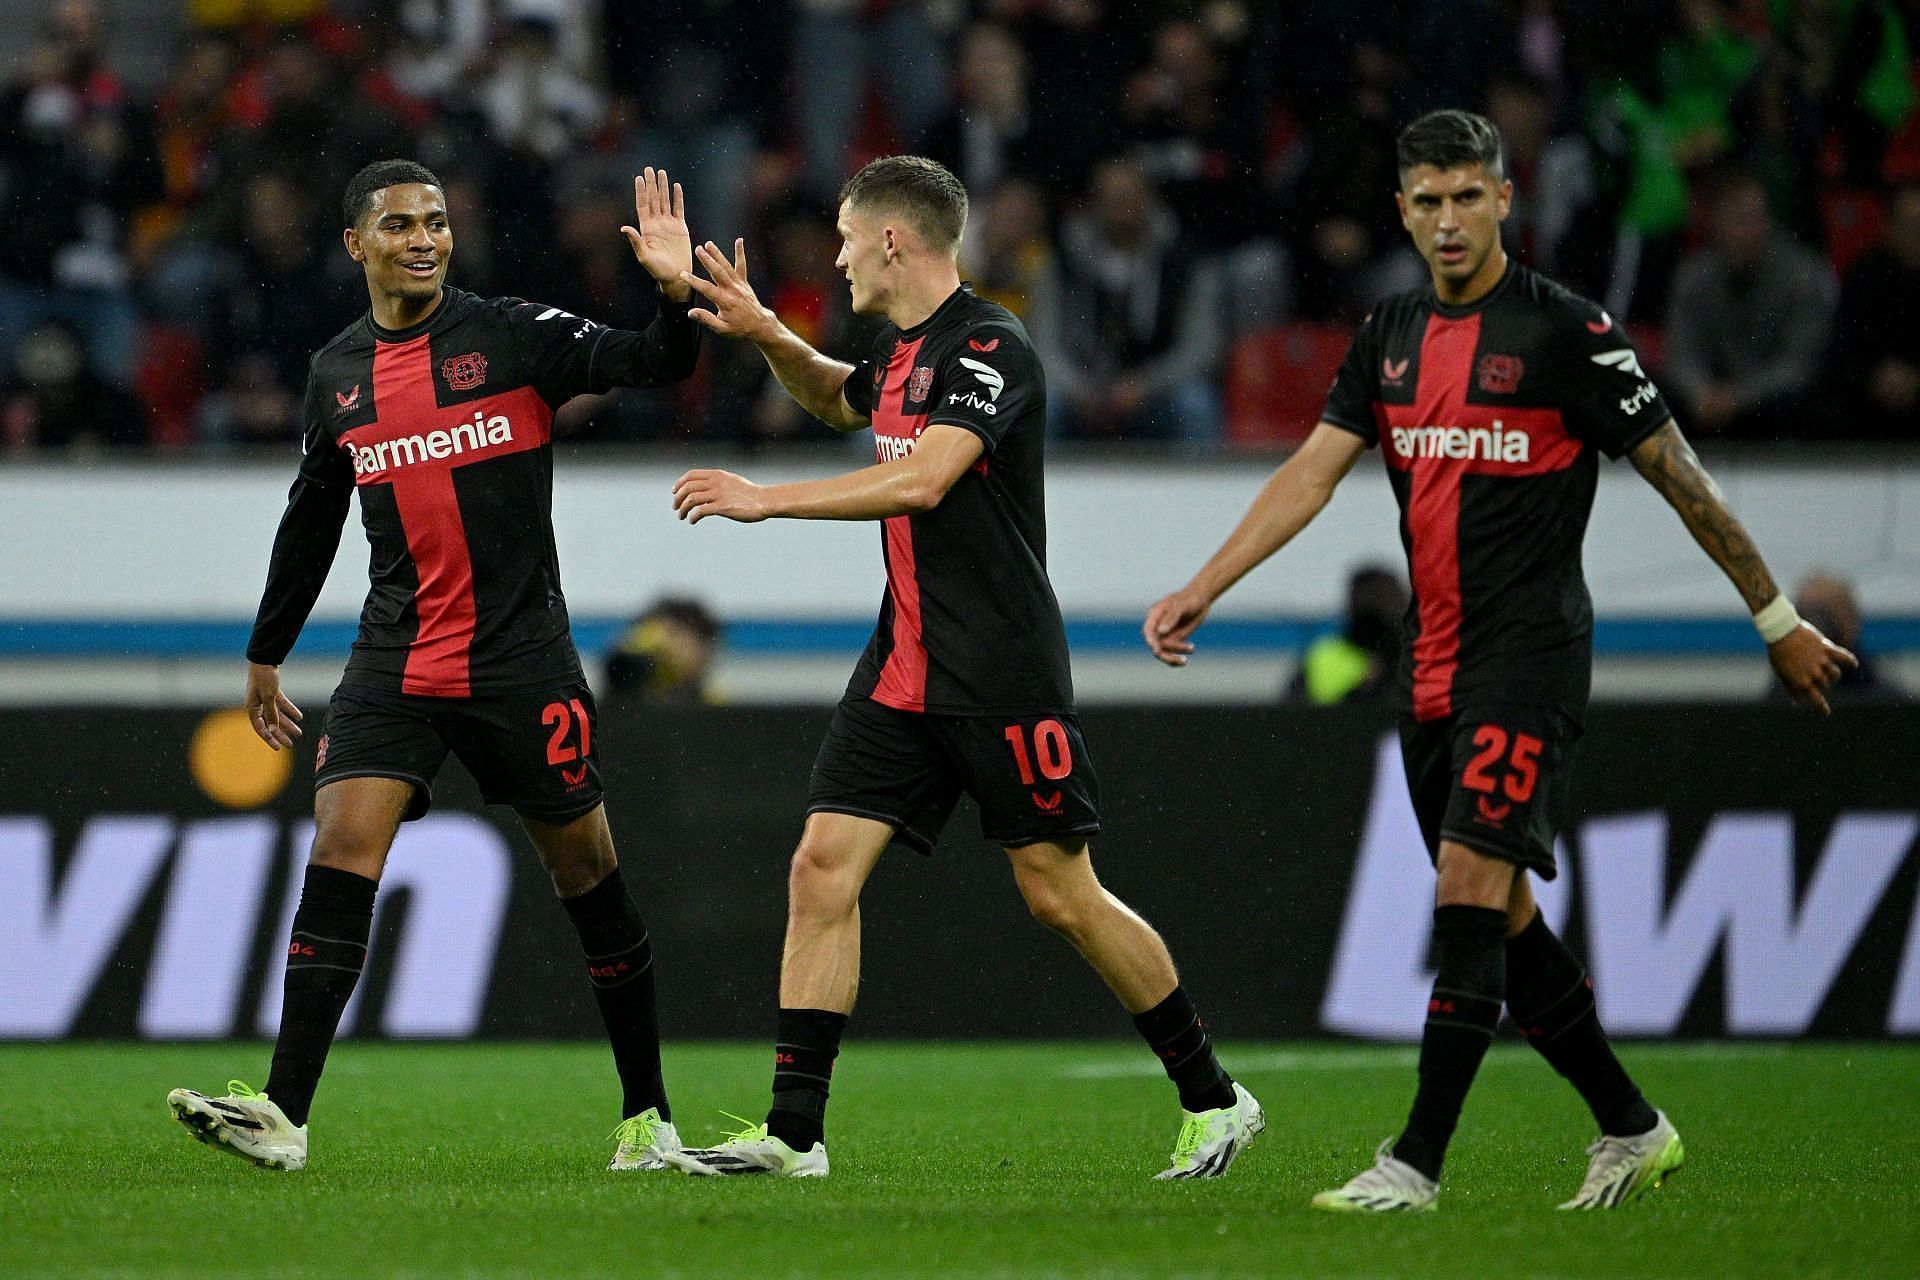 Leverkusen look set to be the biggest surprise package of the season across the big five leagues.